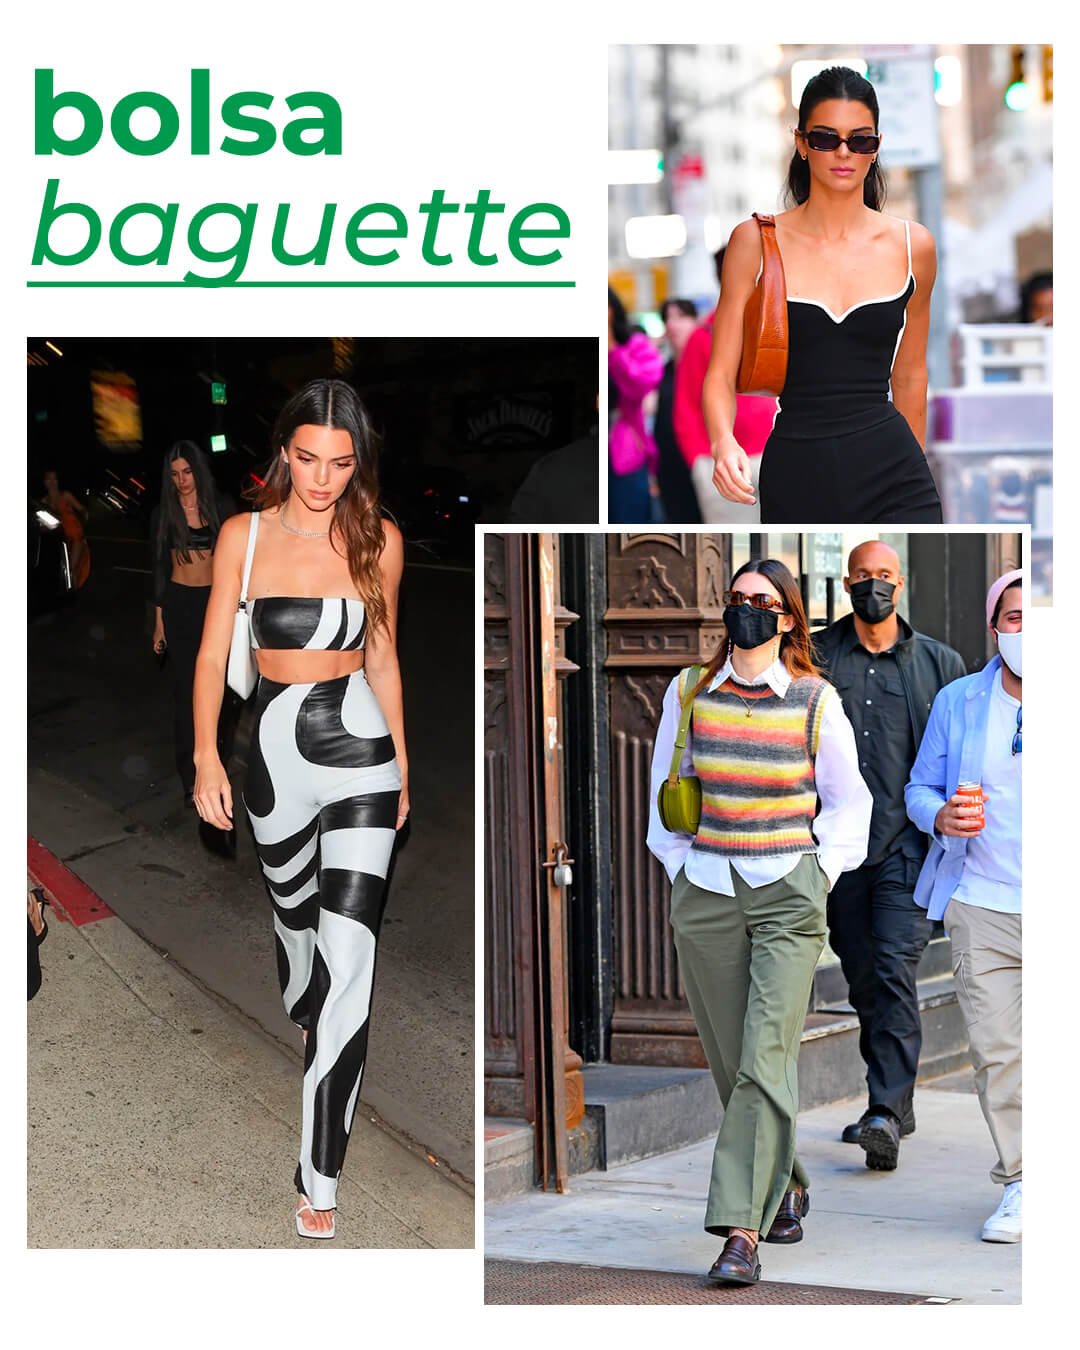 It girls - Kendall Jenner - Kendall Jenner - Inverno - Street Style - https://stealthelook.com.br